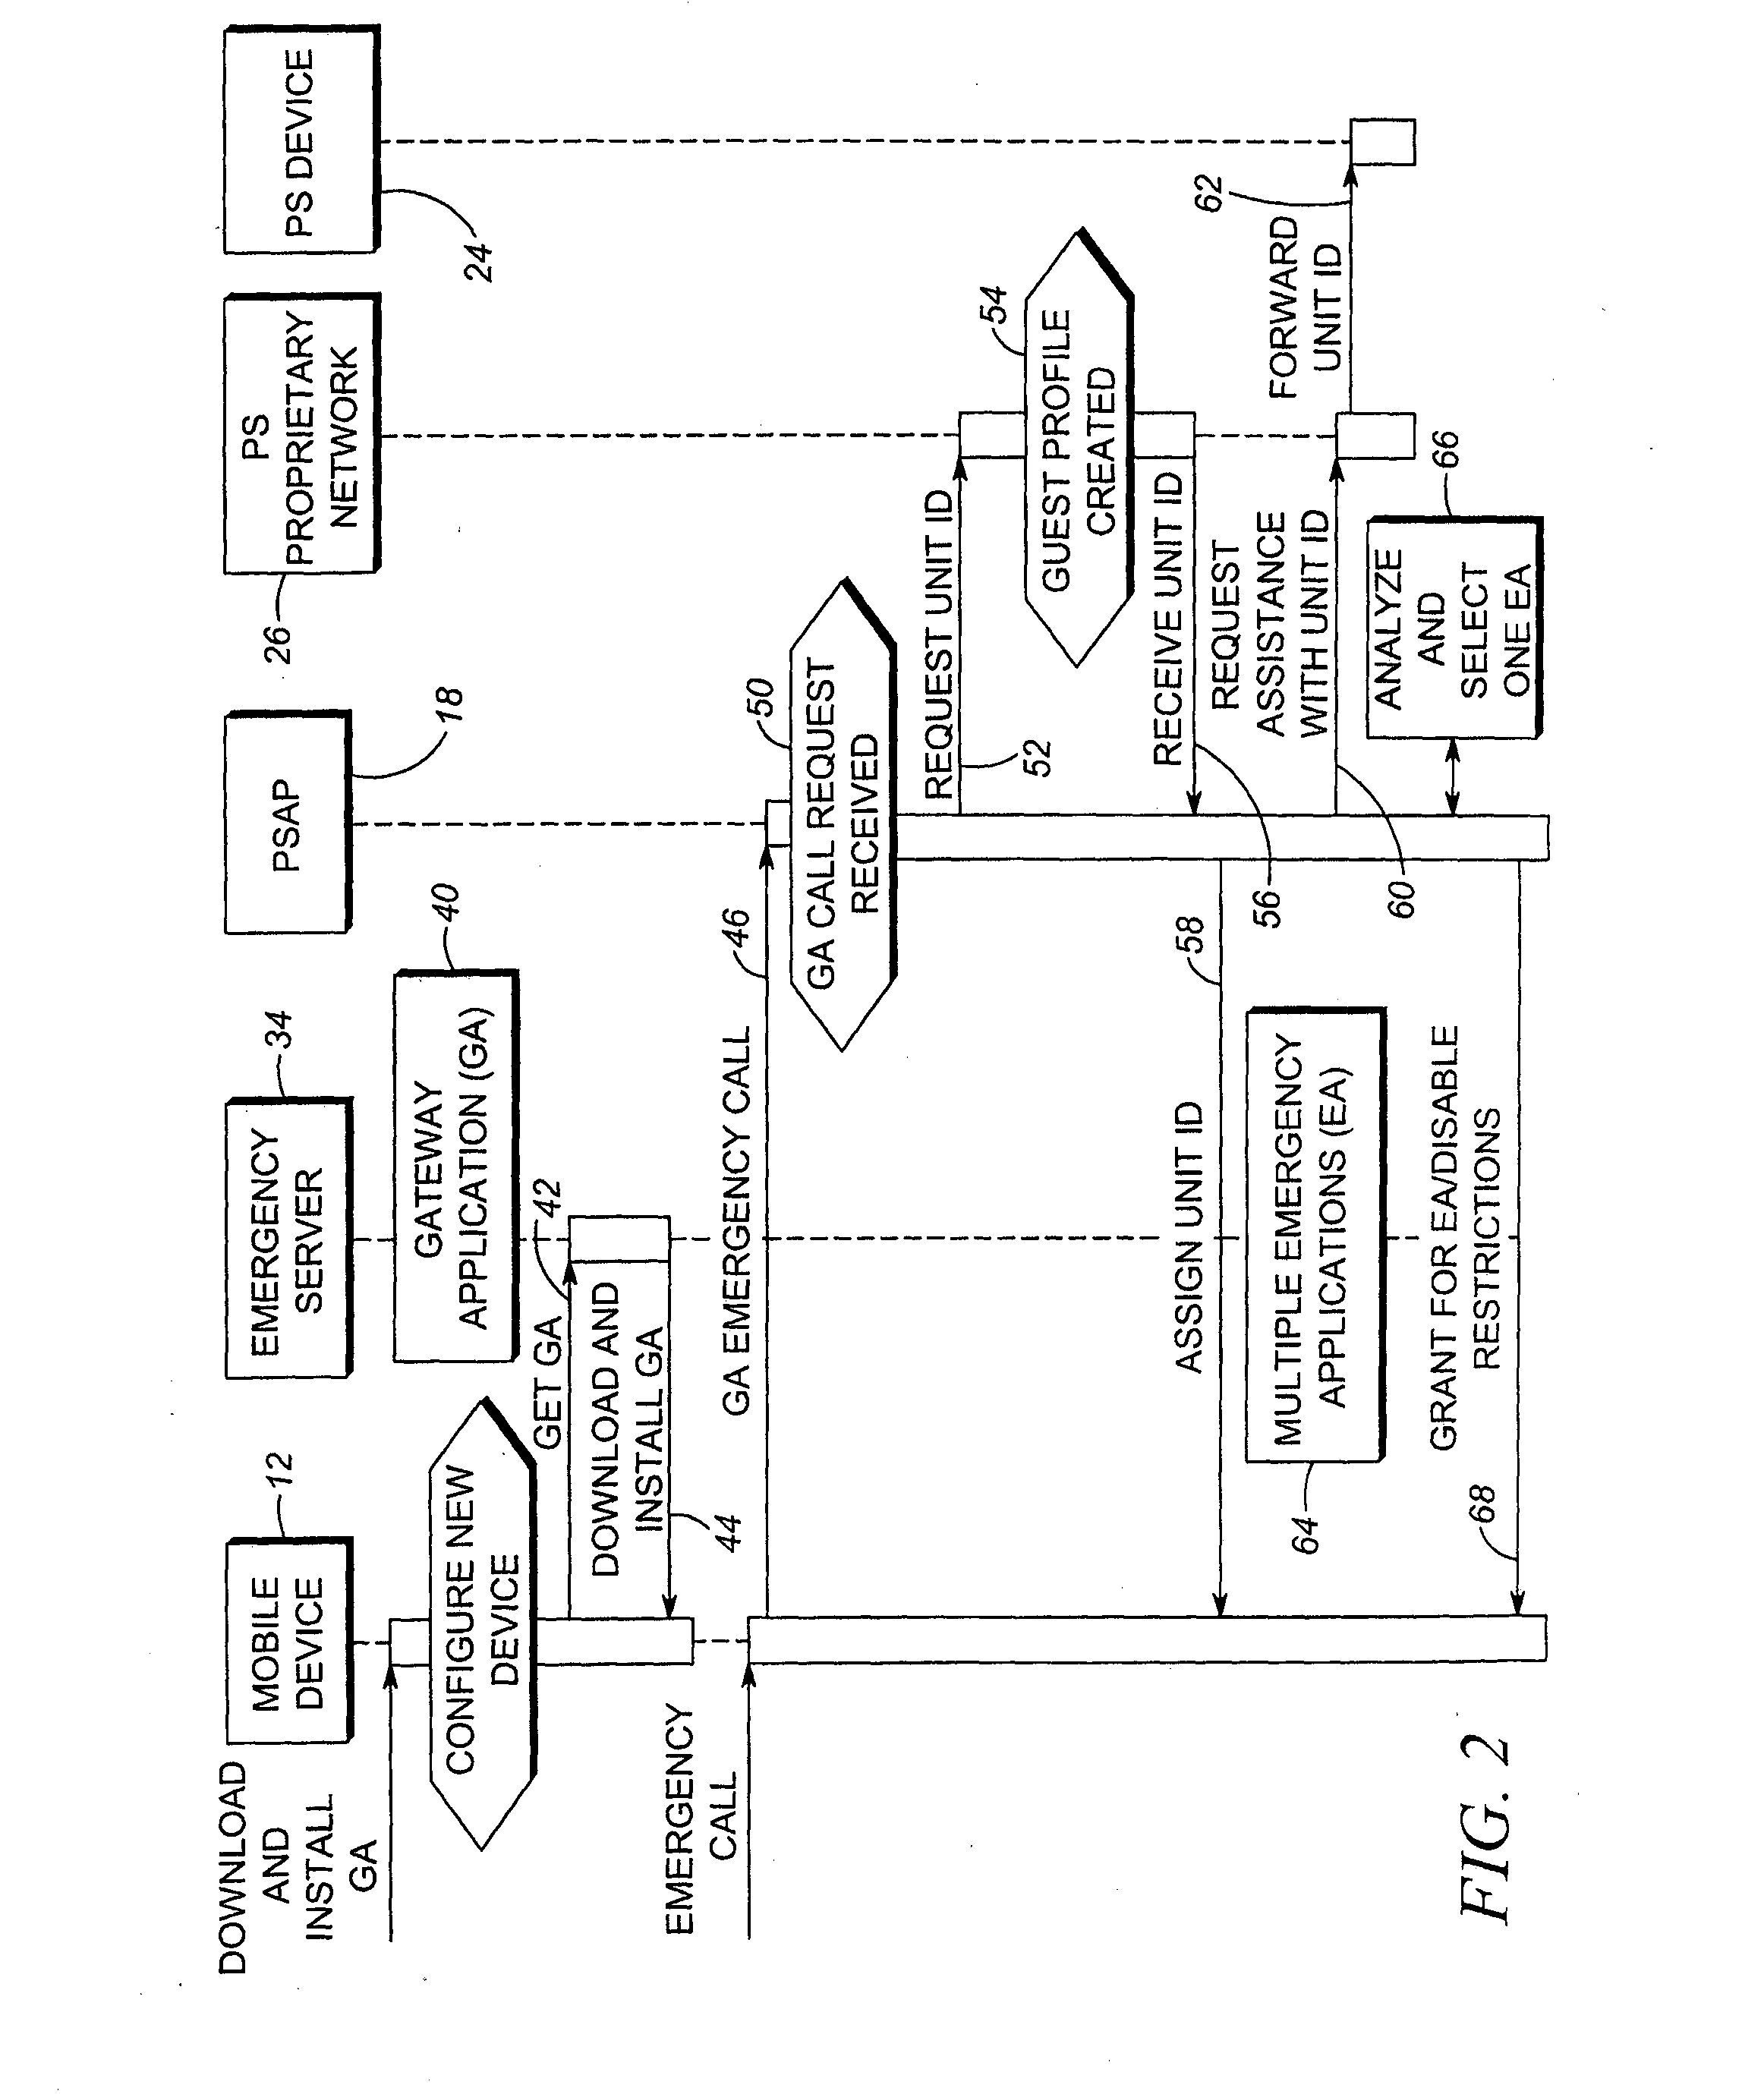 Method of and system for controlling communications between a personal communications device and a public safety network in an emergency